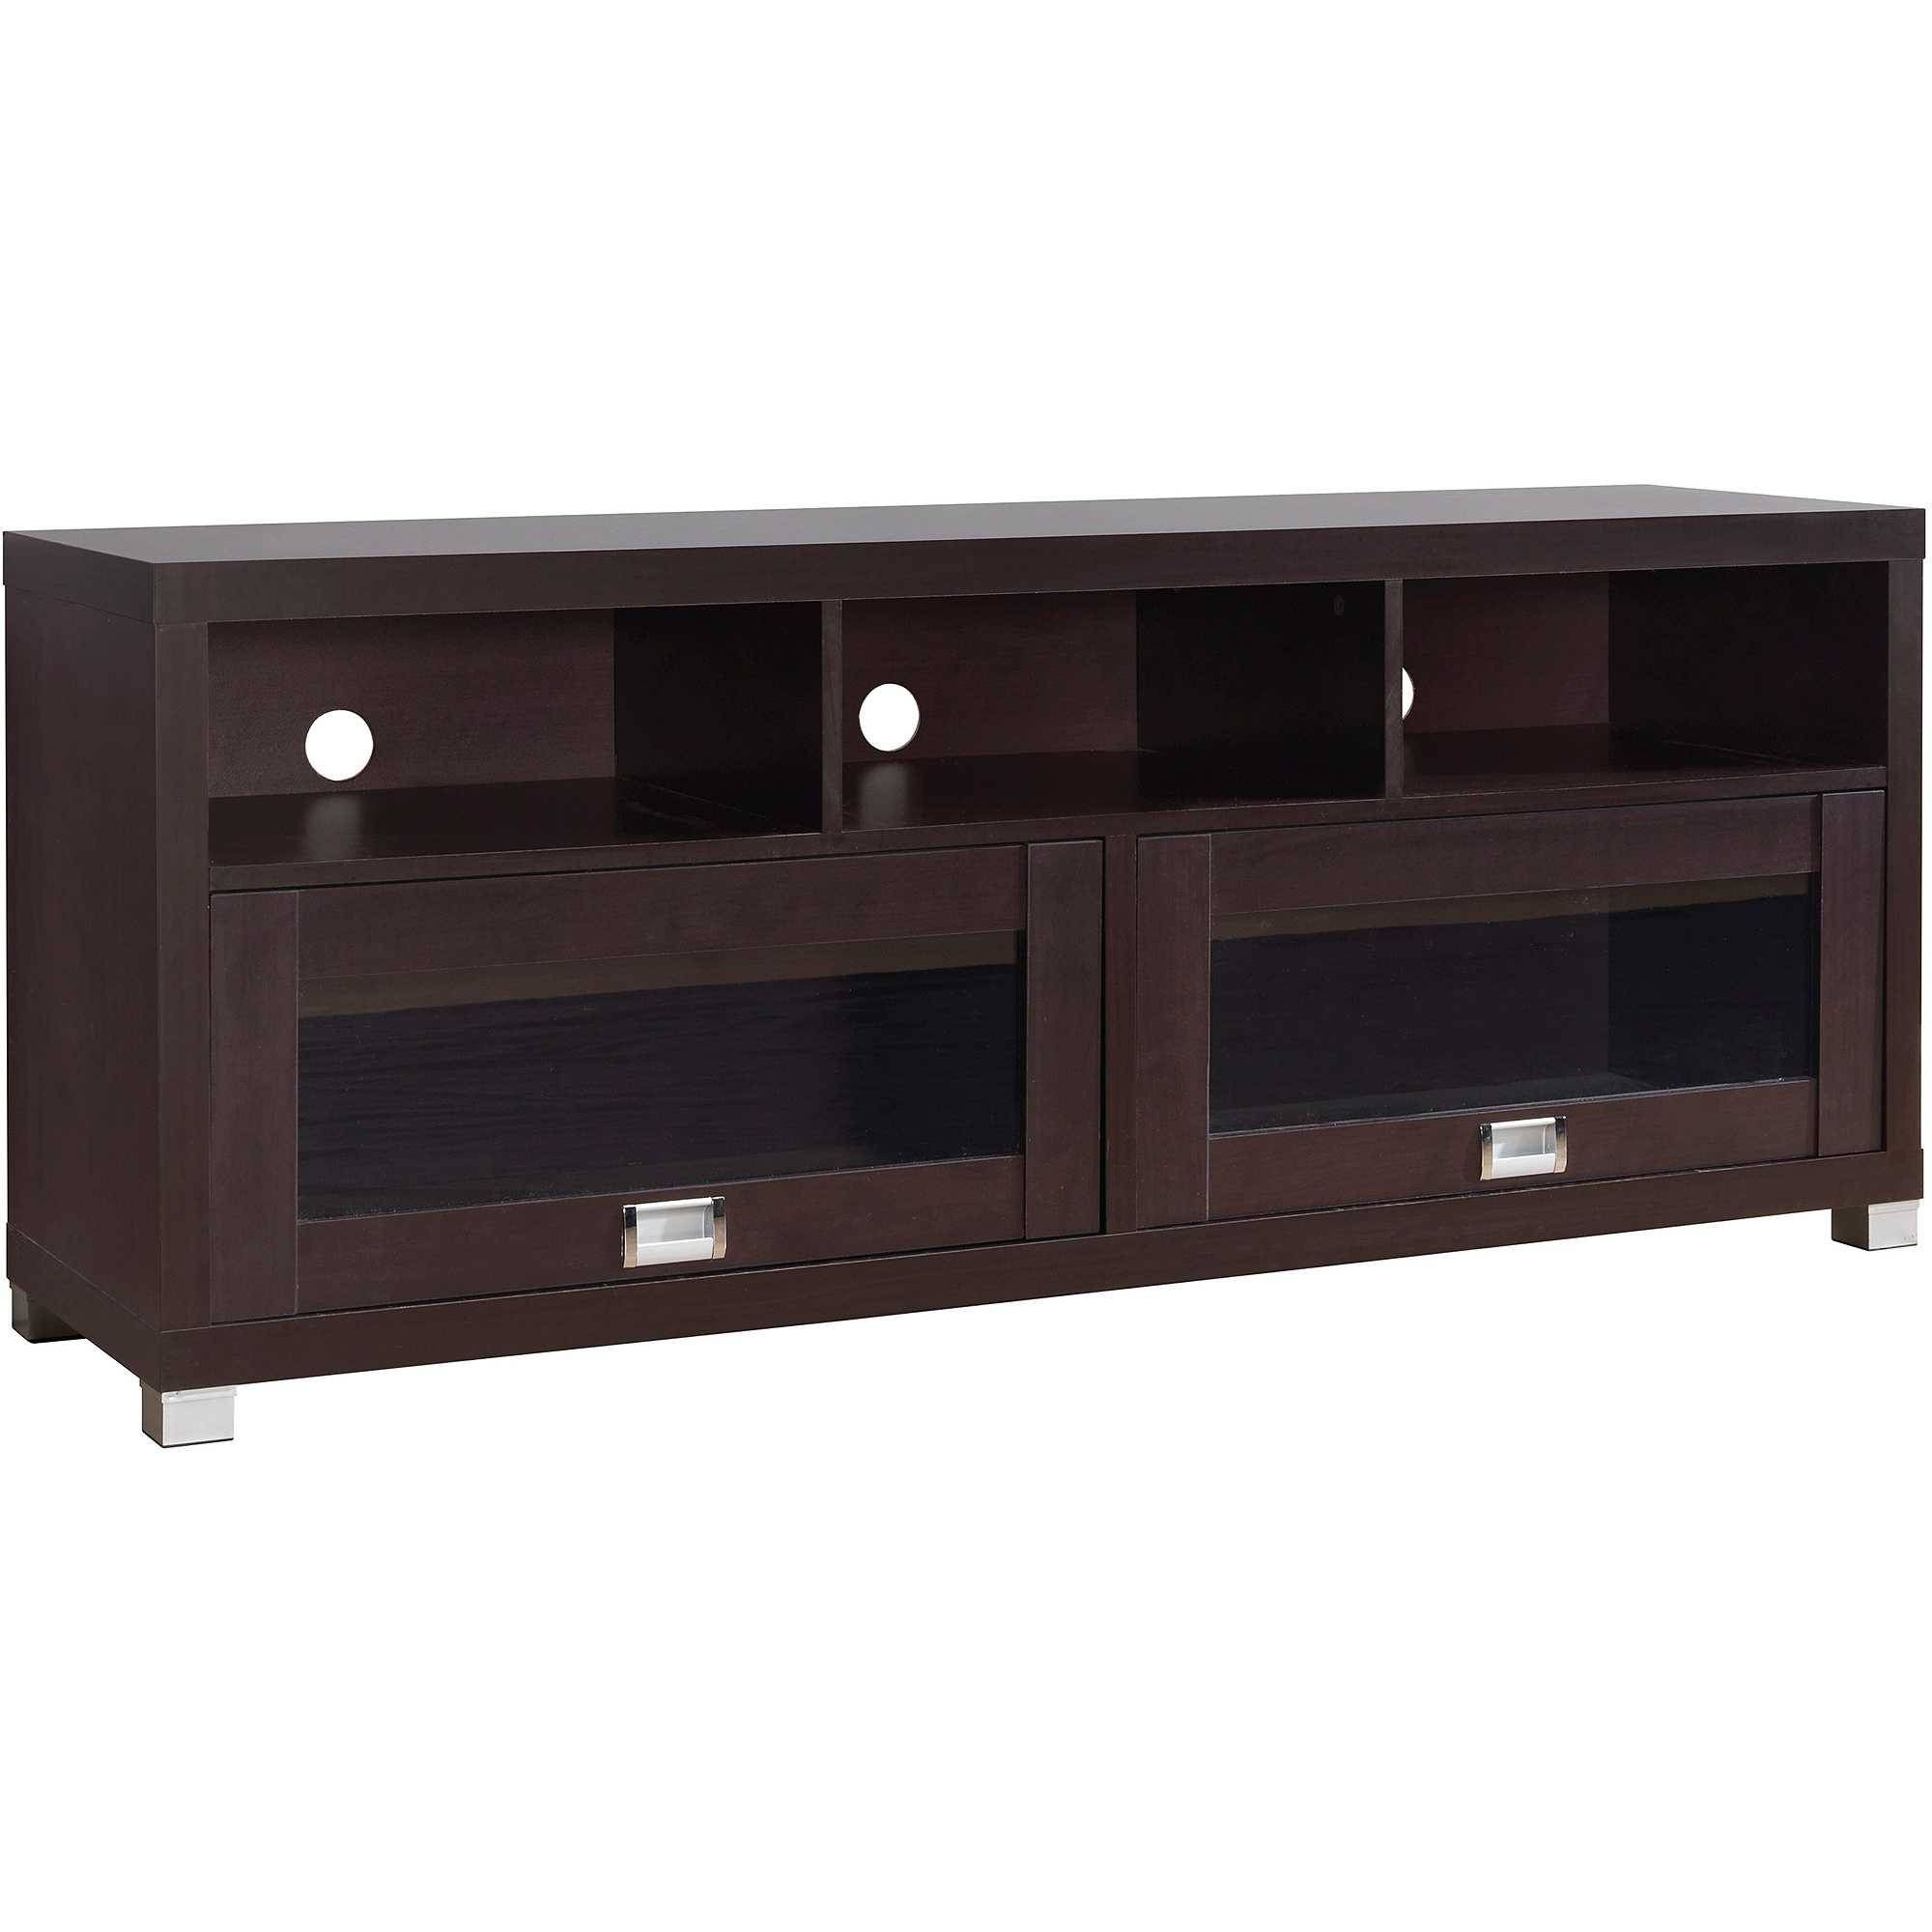 Espresso Tv Stand, Techni Mobili Durbin Tv Cabinet For Tvs Up To With Tv Stands 38 Inches Wide (View 11 of 15)